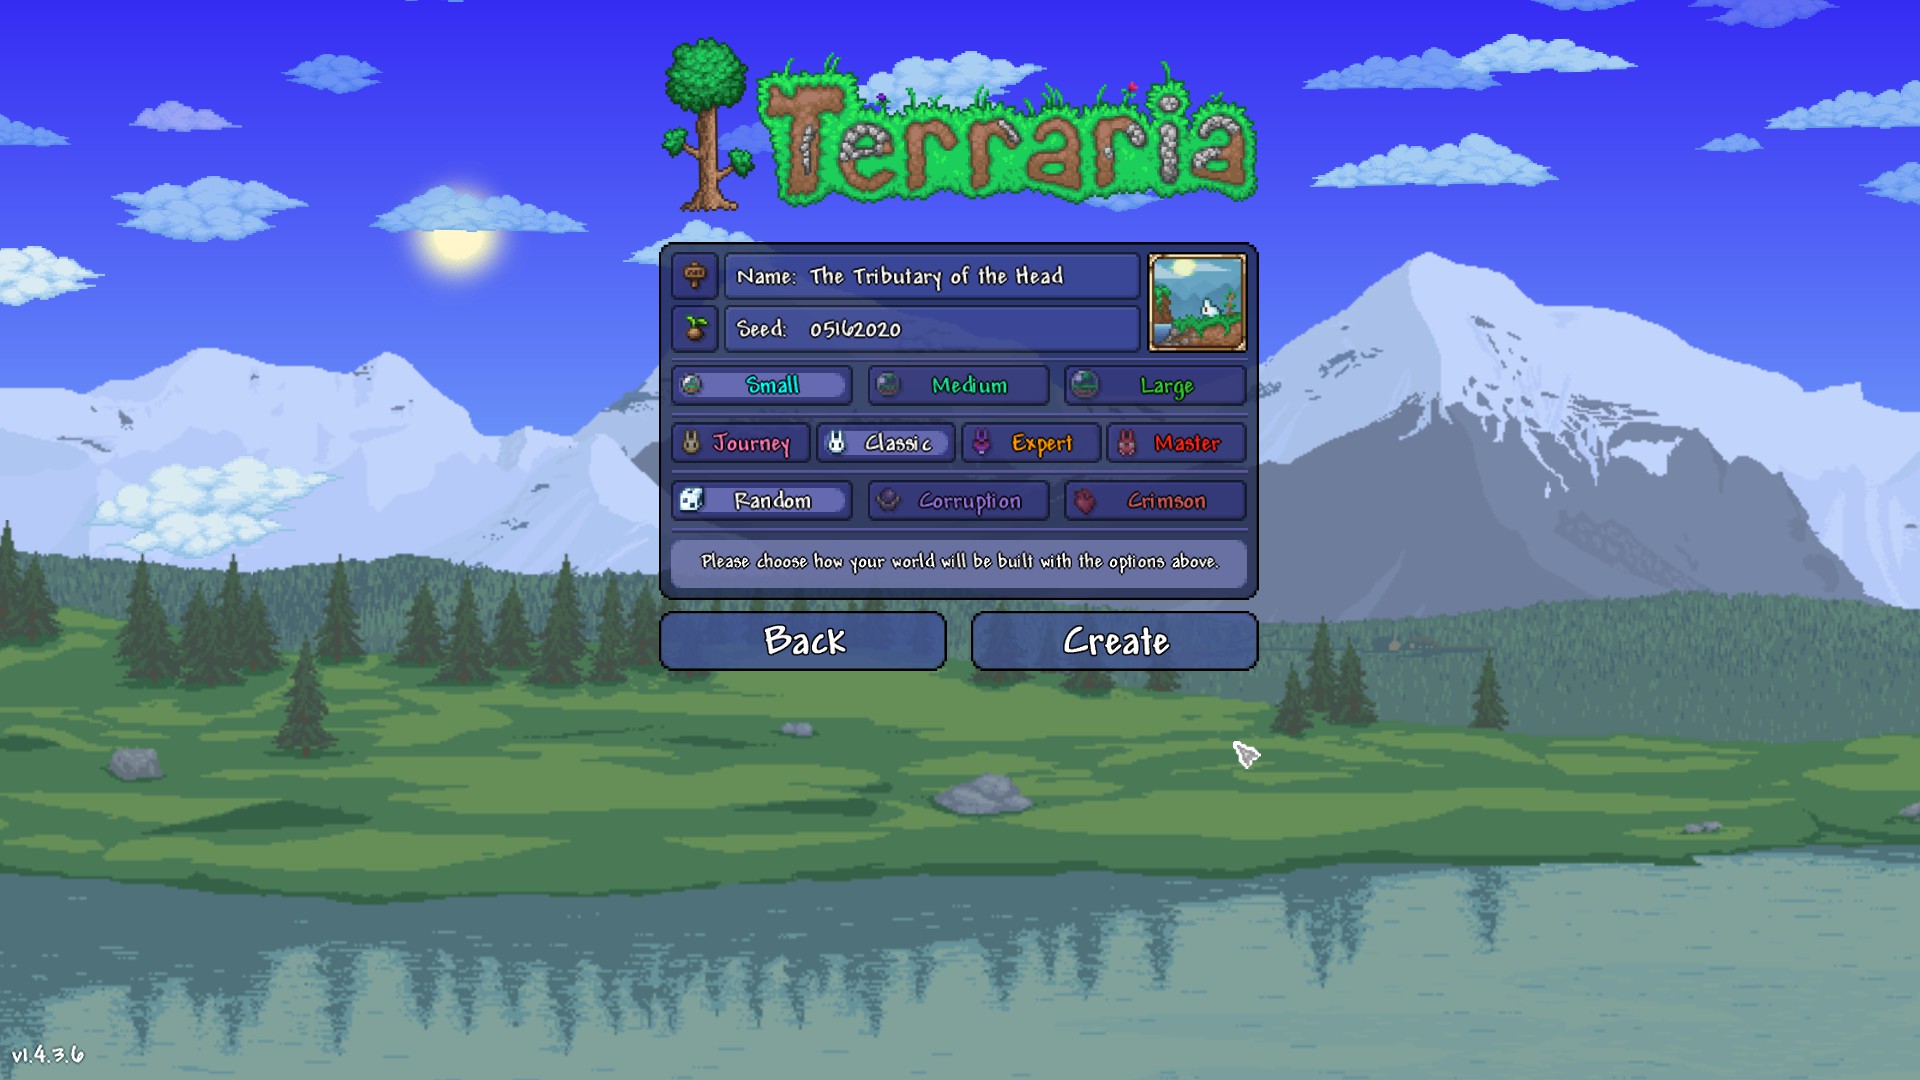 Terraria How to Get Copper Shortsword in Terraria Guide - Step 5.5.5: Dealing With Tin - F65116B